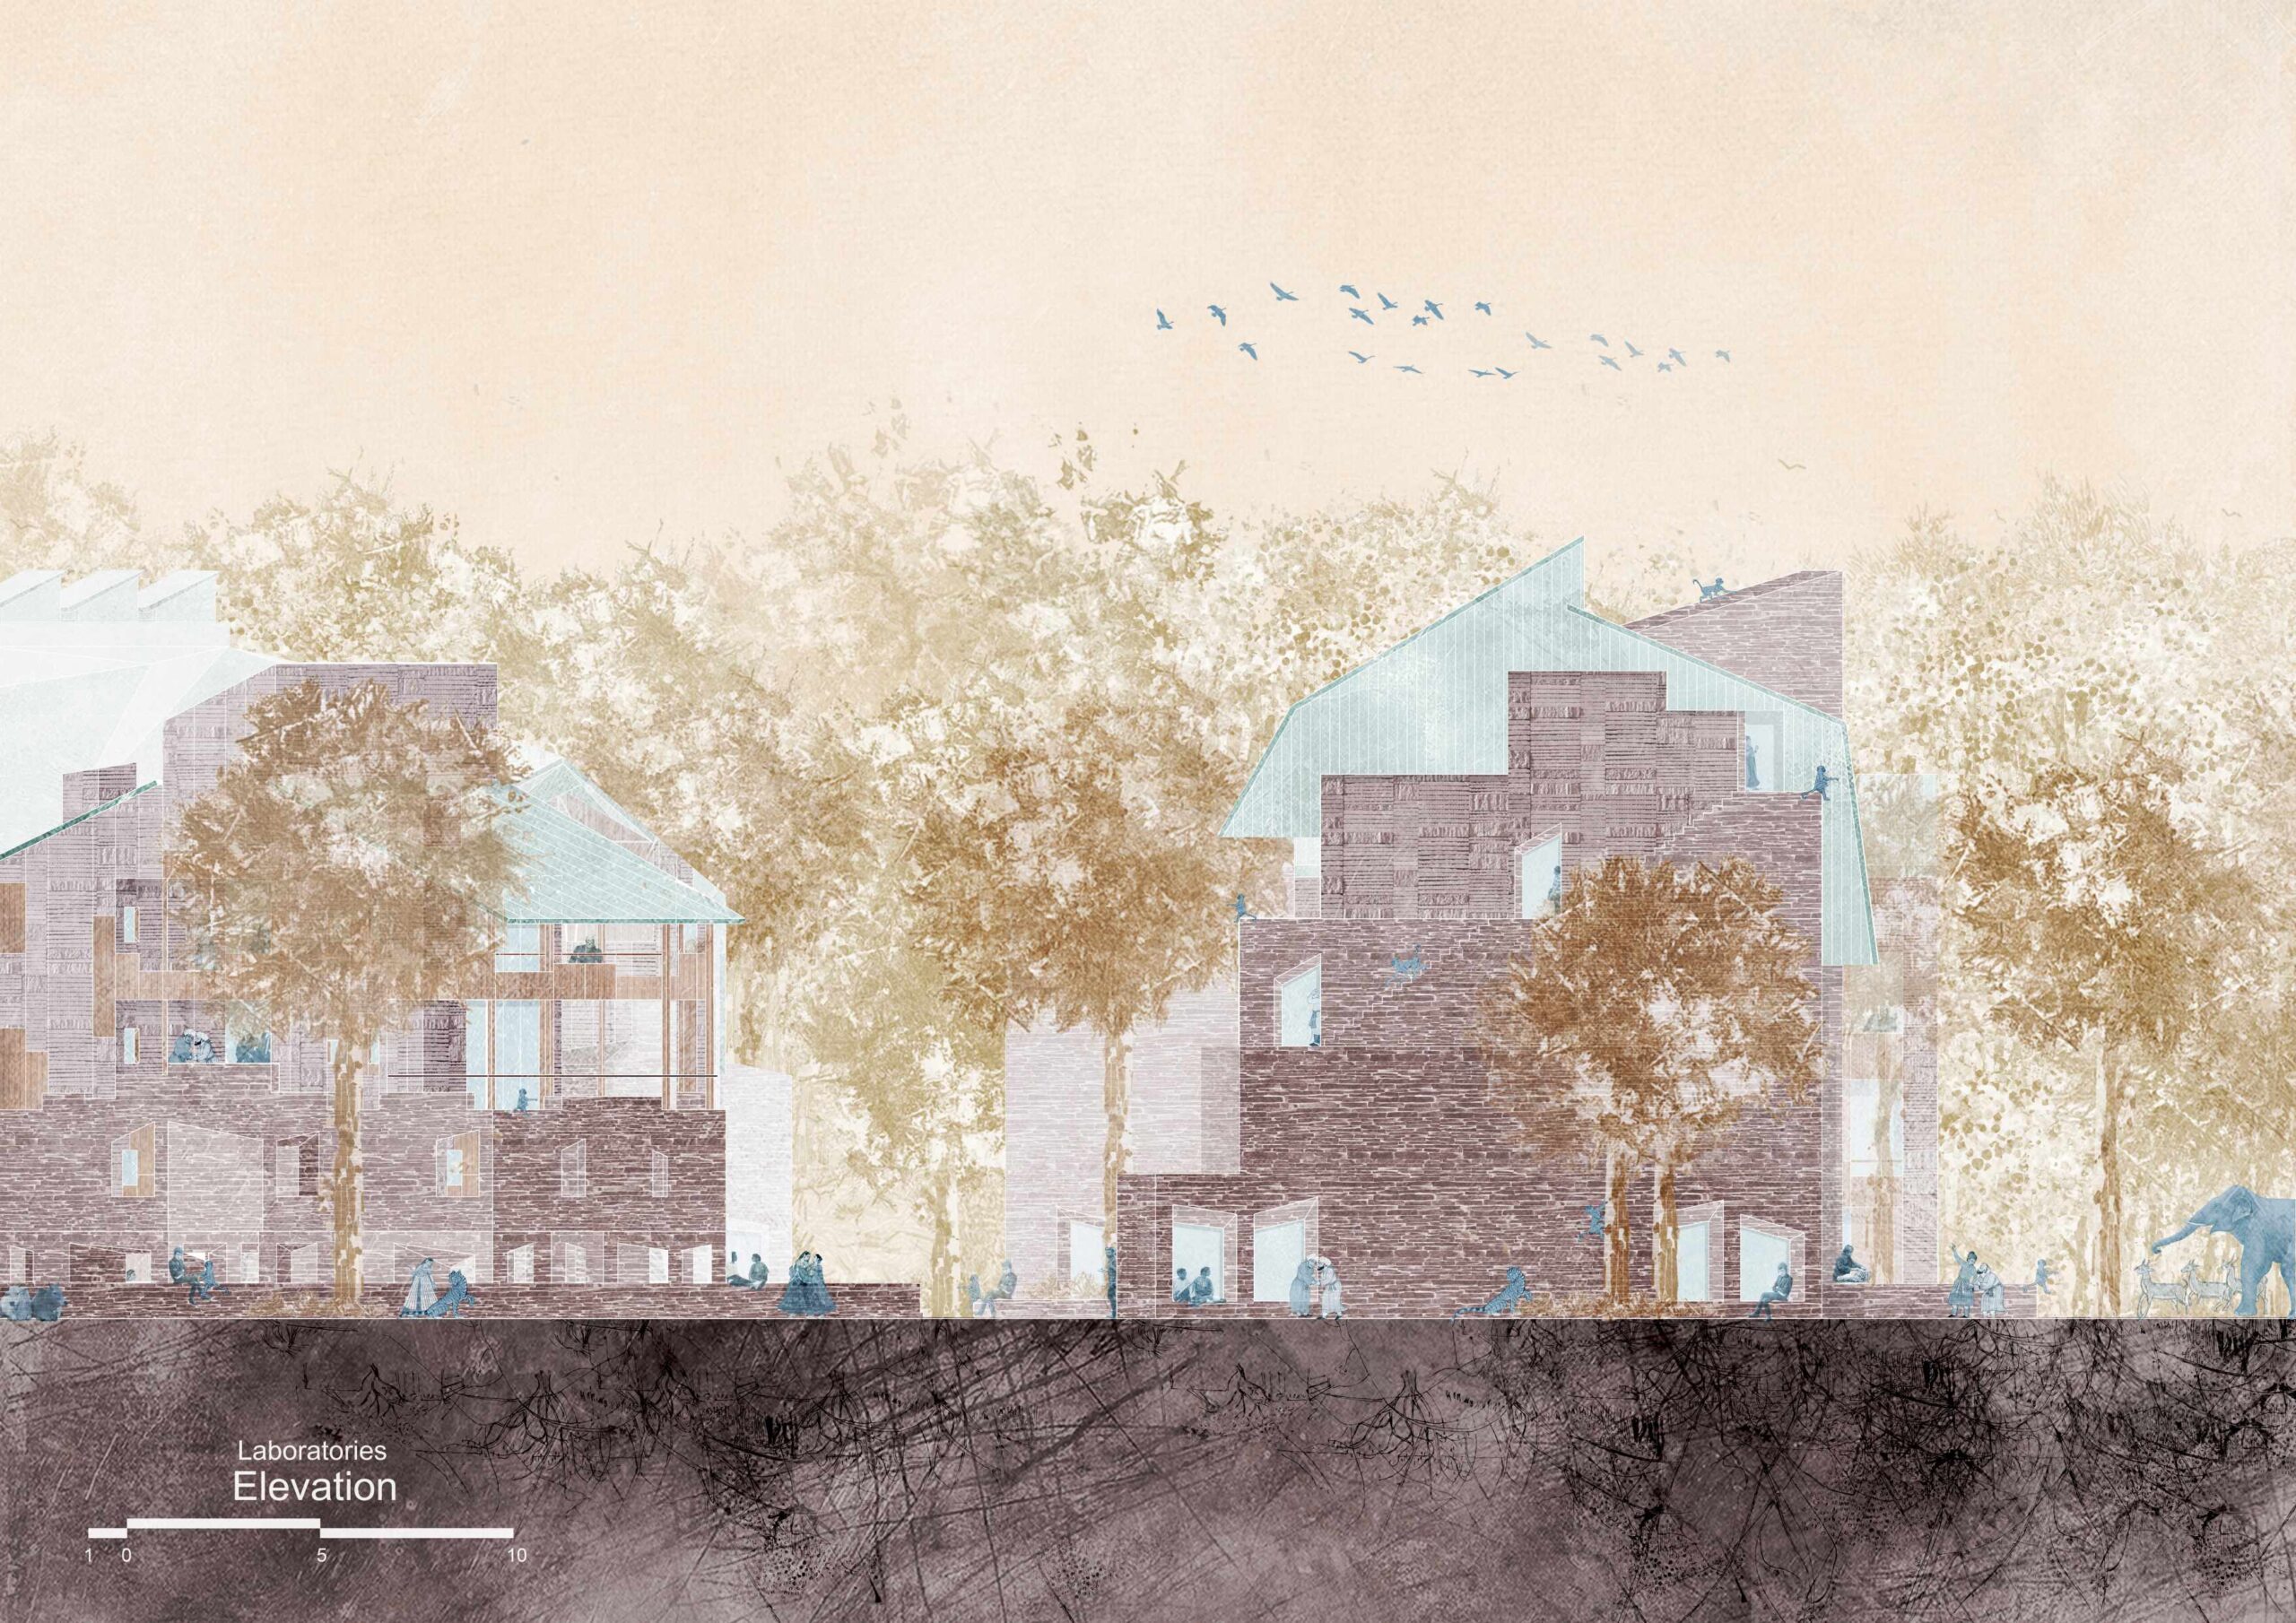 Centre of Excellence, Bengaluru, Competition Entry by Shilpa Mevada + Hundredhands | Council of Architecture, India 21